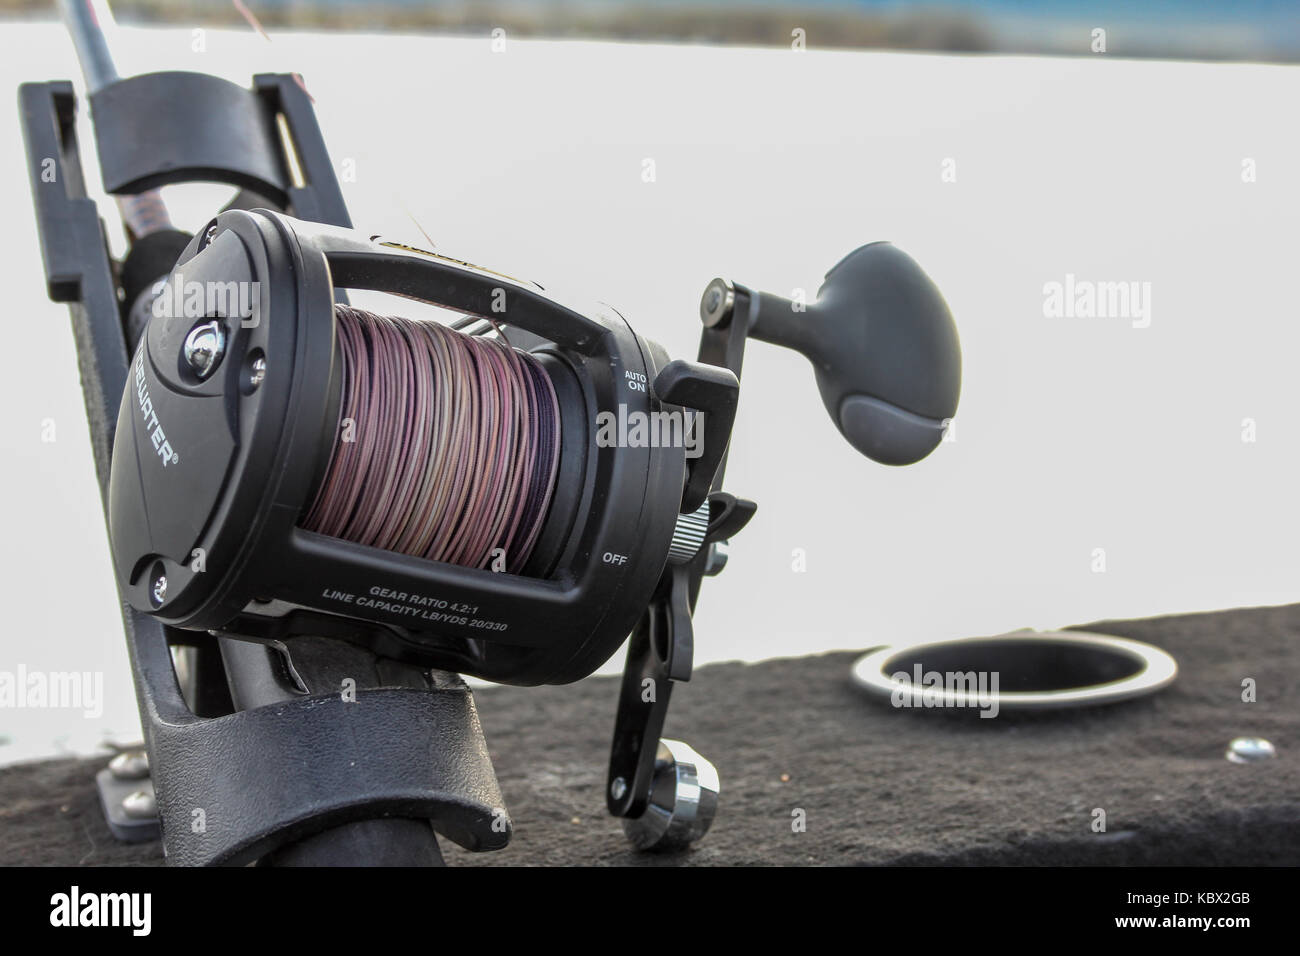 https://c8.alamy.com/comp/KBX2GB/close-up-of-a-fishing-rod-and-reel-with-lead-core-fishing-line-high-KBX2GB.jpg